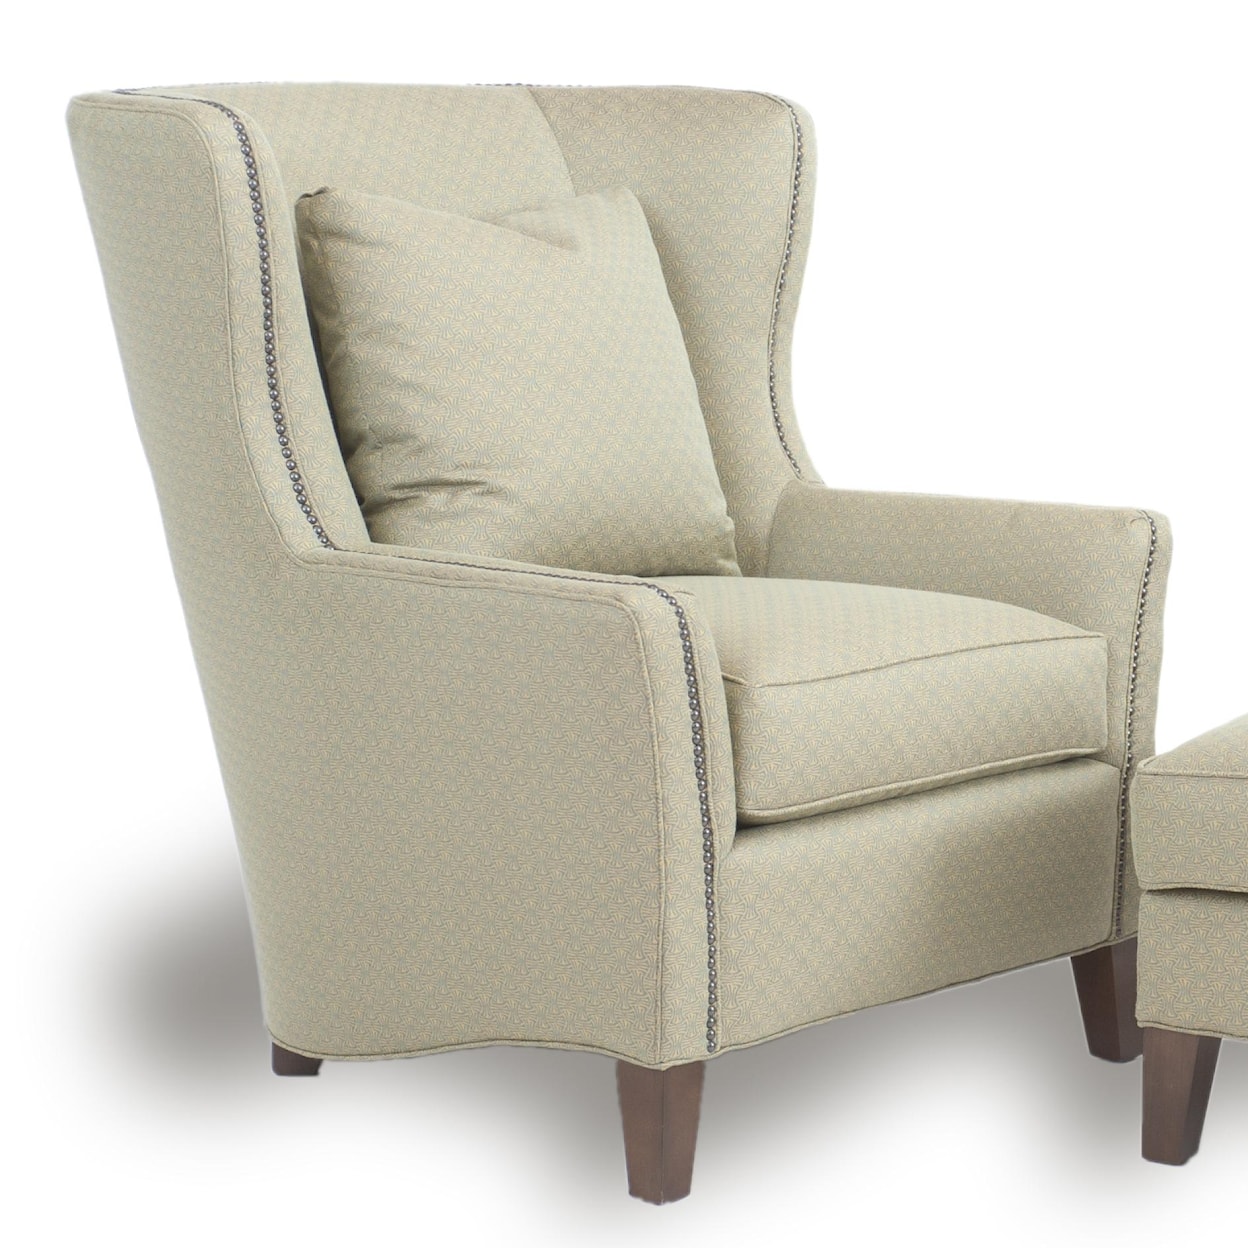 Kirkwood Accent Chairs and Ottomans SB Upholstered Wingback Chair